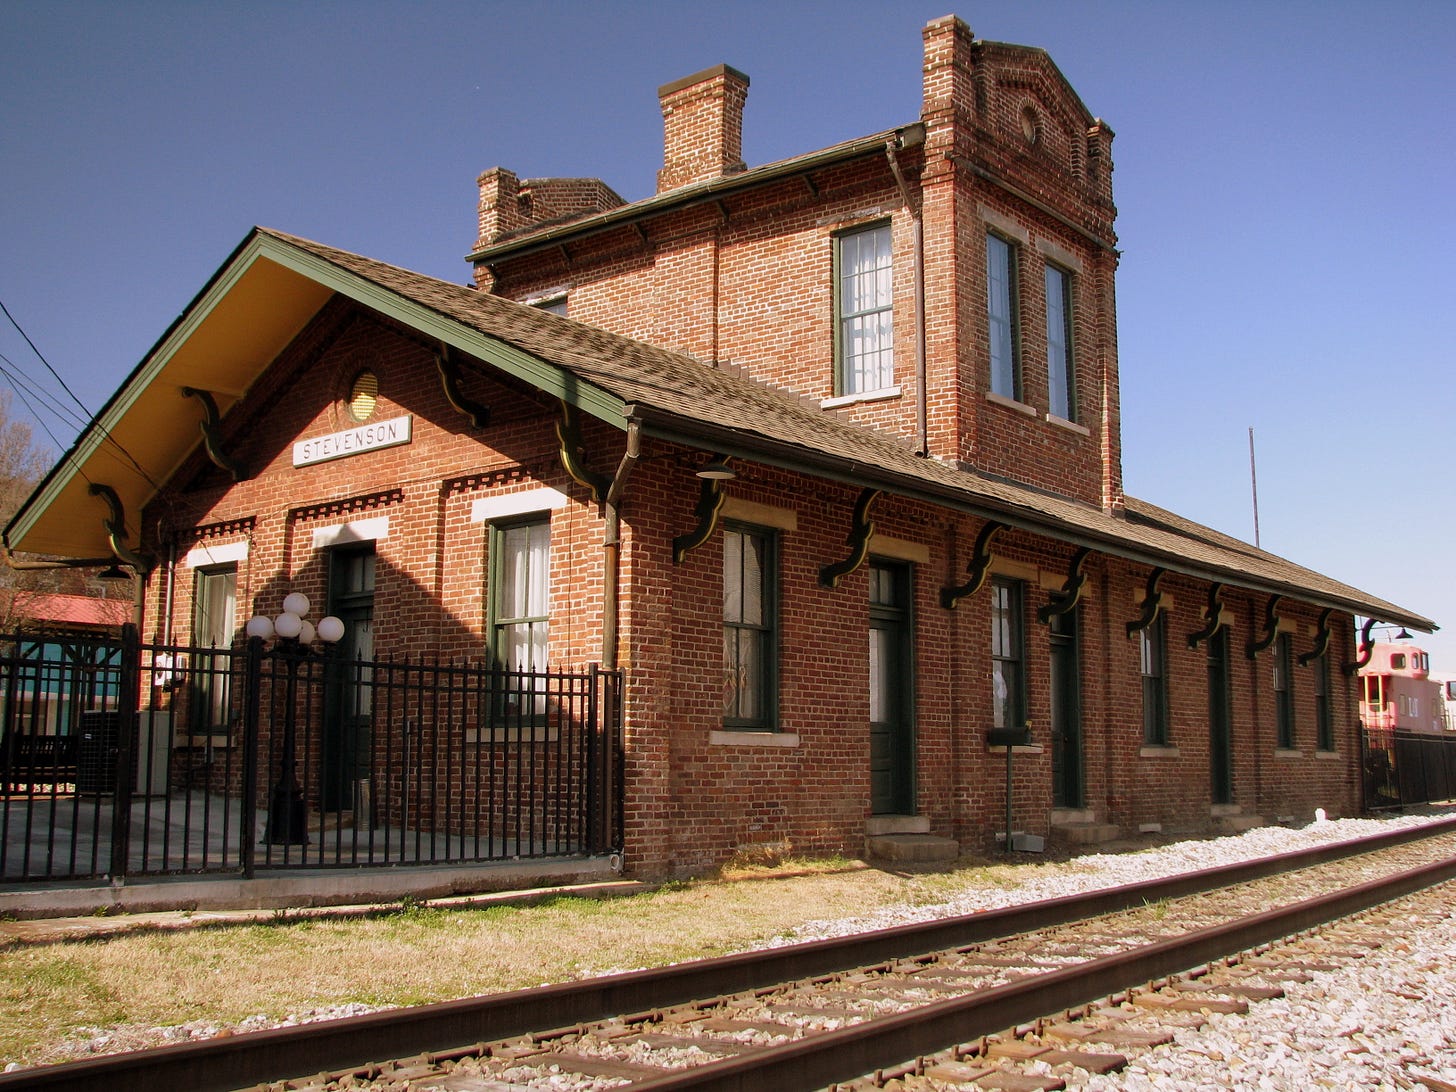 9 Historic Railroad Towns And Train Depots In Alabama